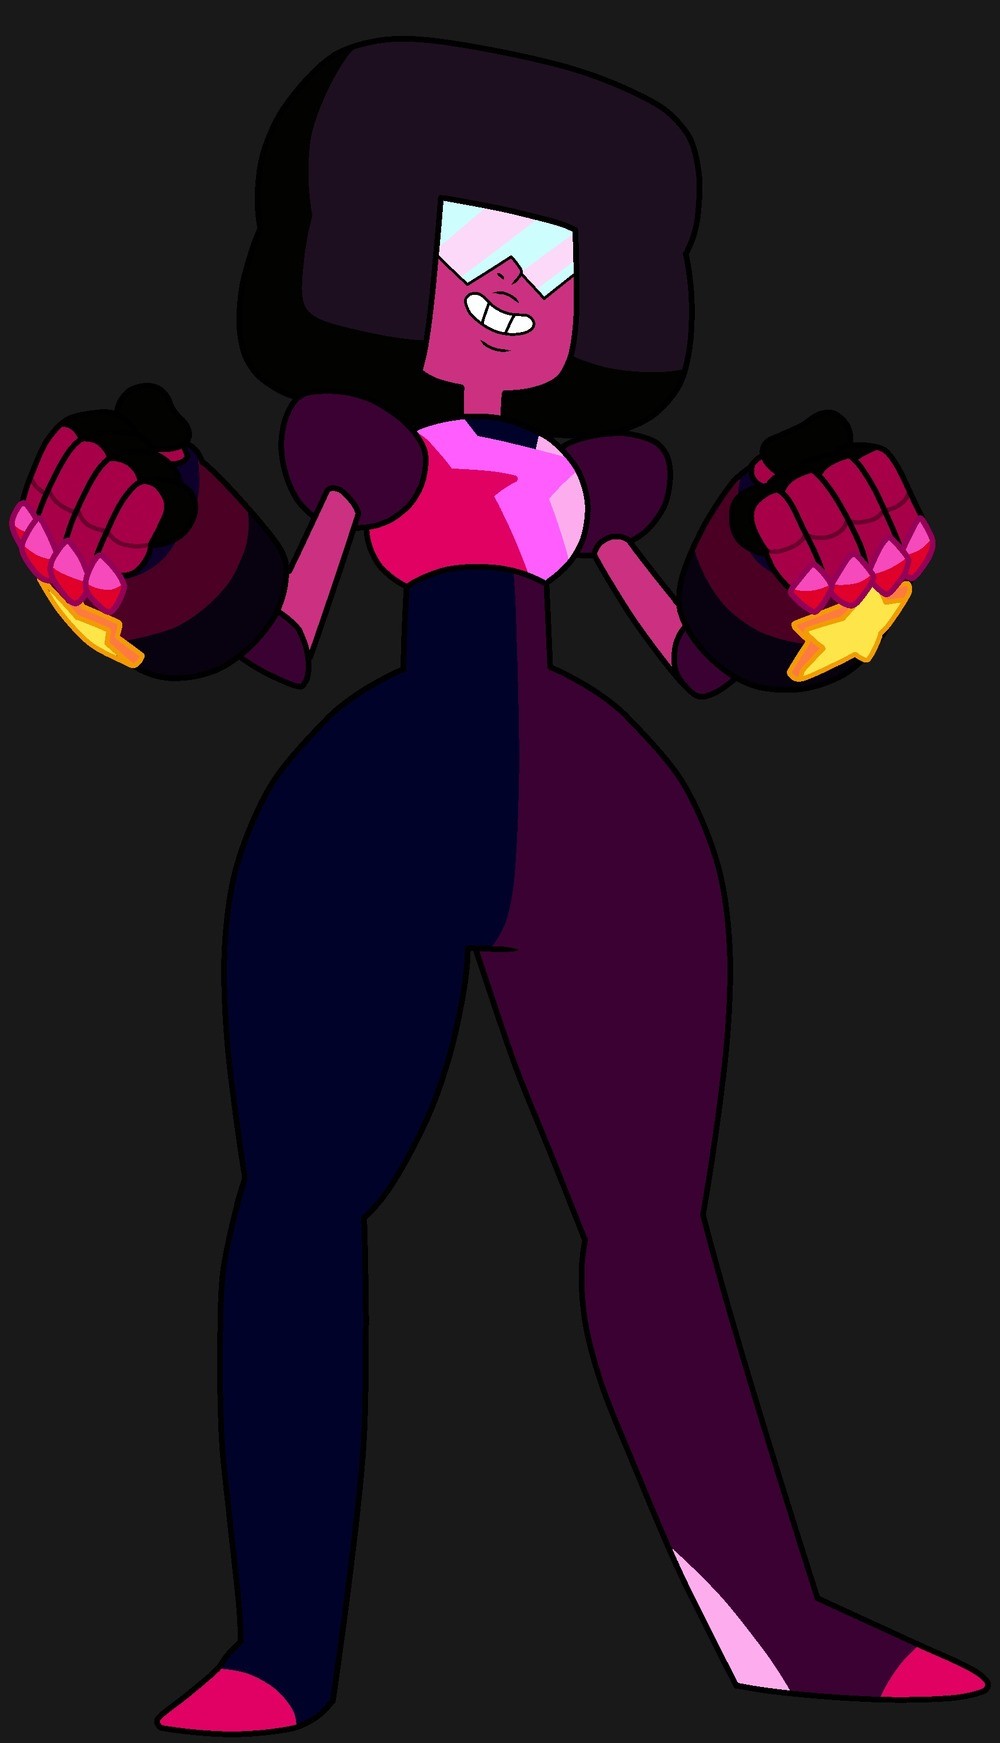 eeing into the future is best described the way garnet had. she see's,...